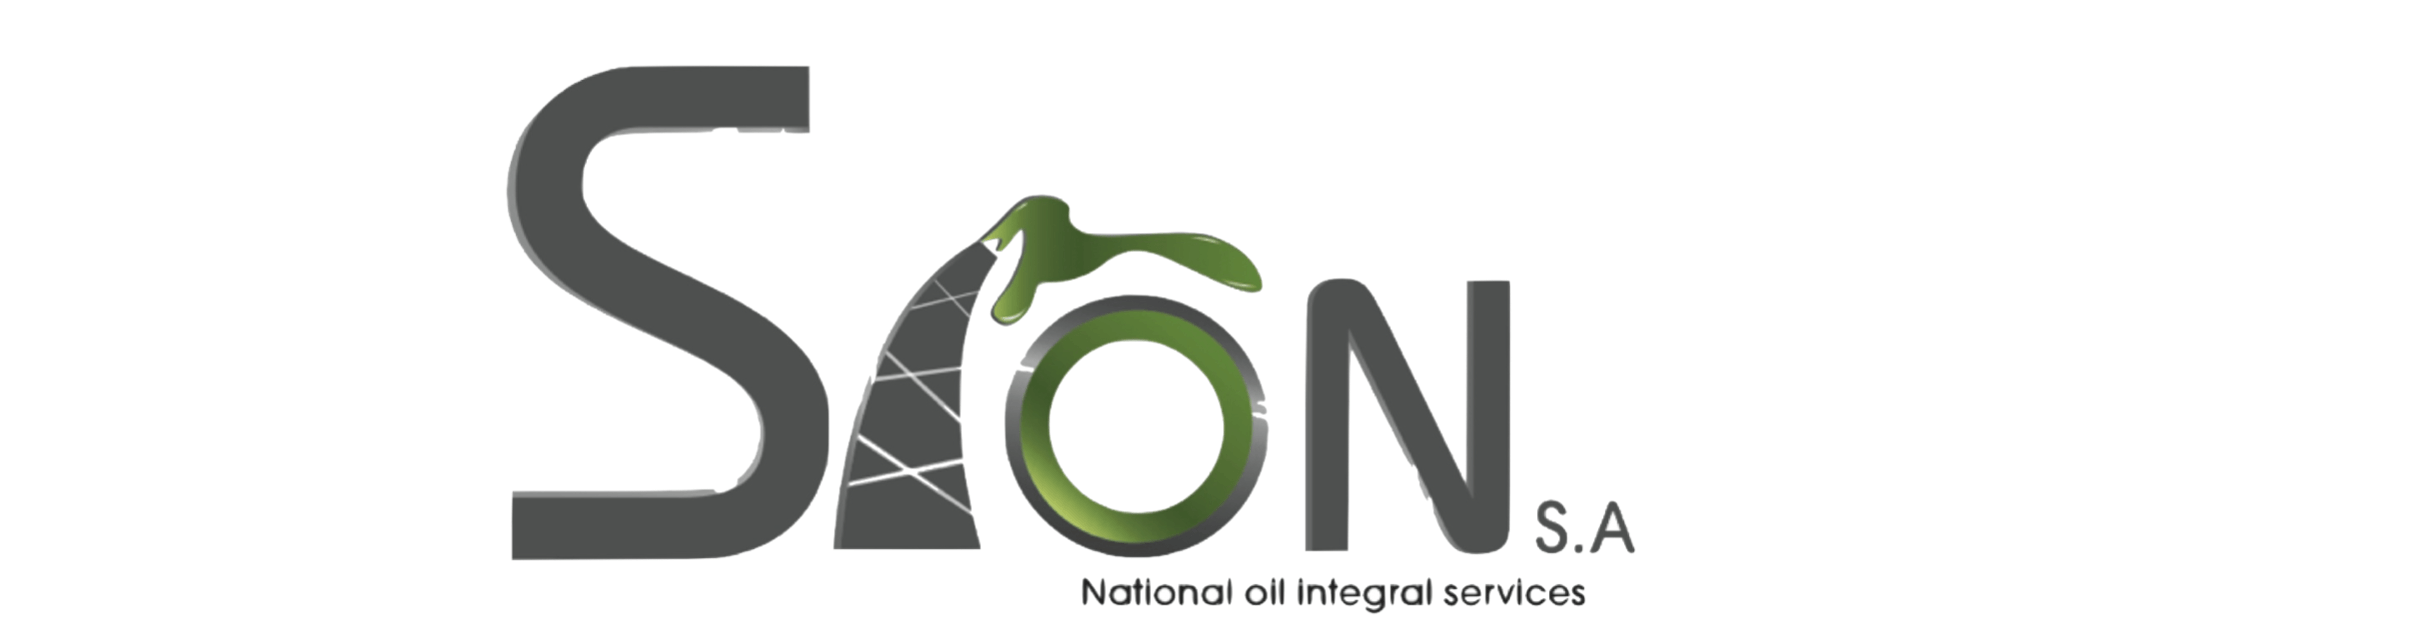 Sion Logo - SION S.A.